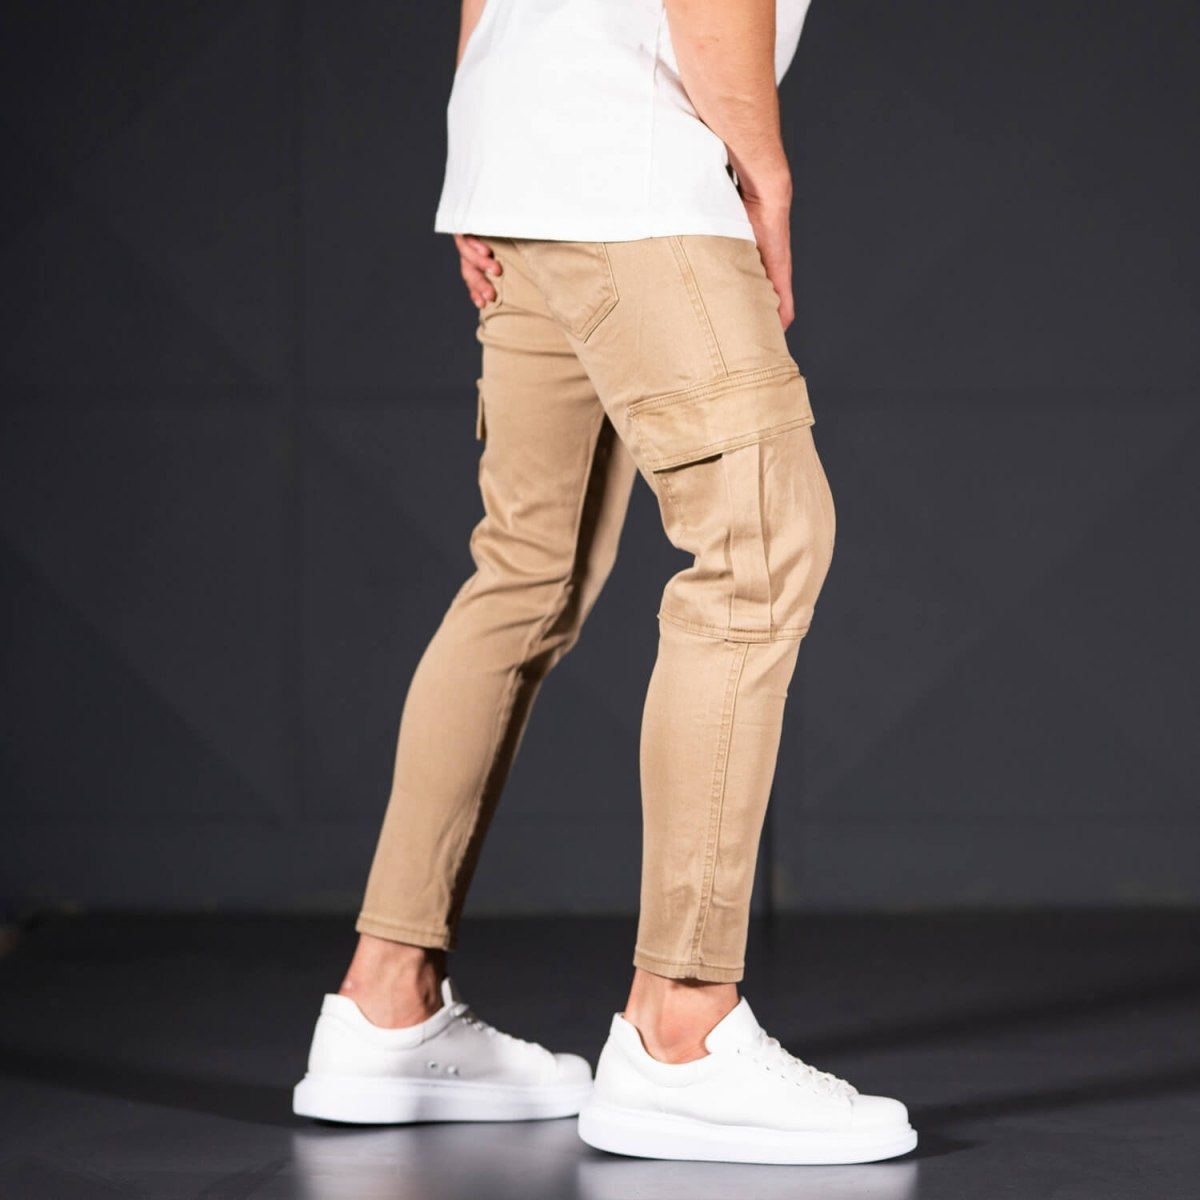 Men's Jeans with Pockets Style in Camel | Martin Valen